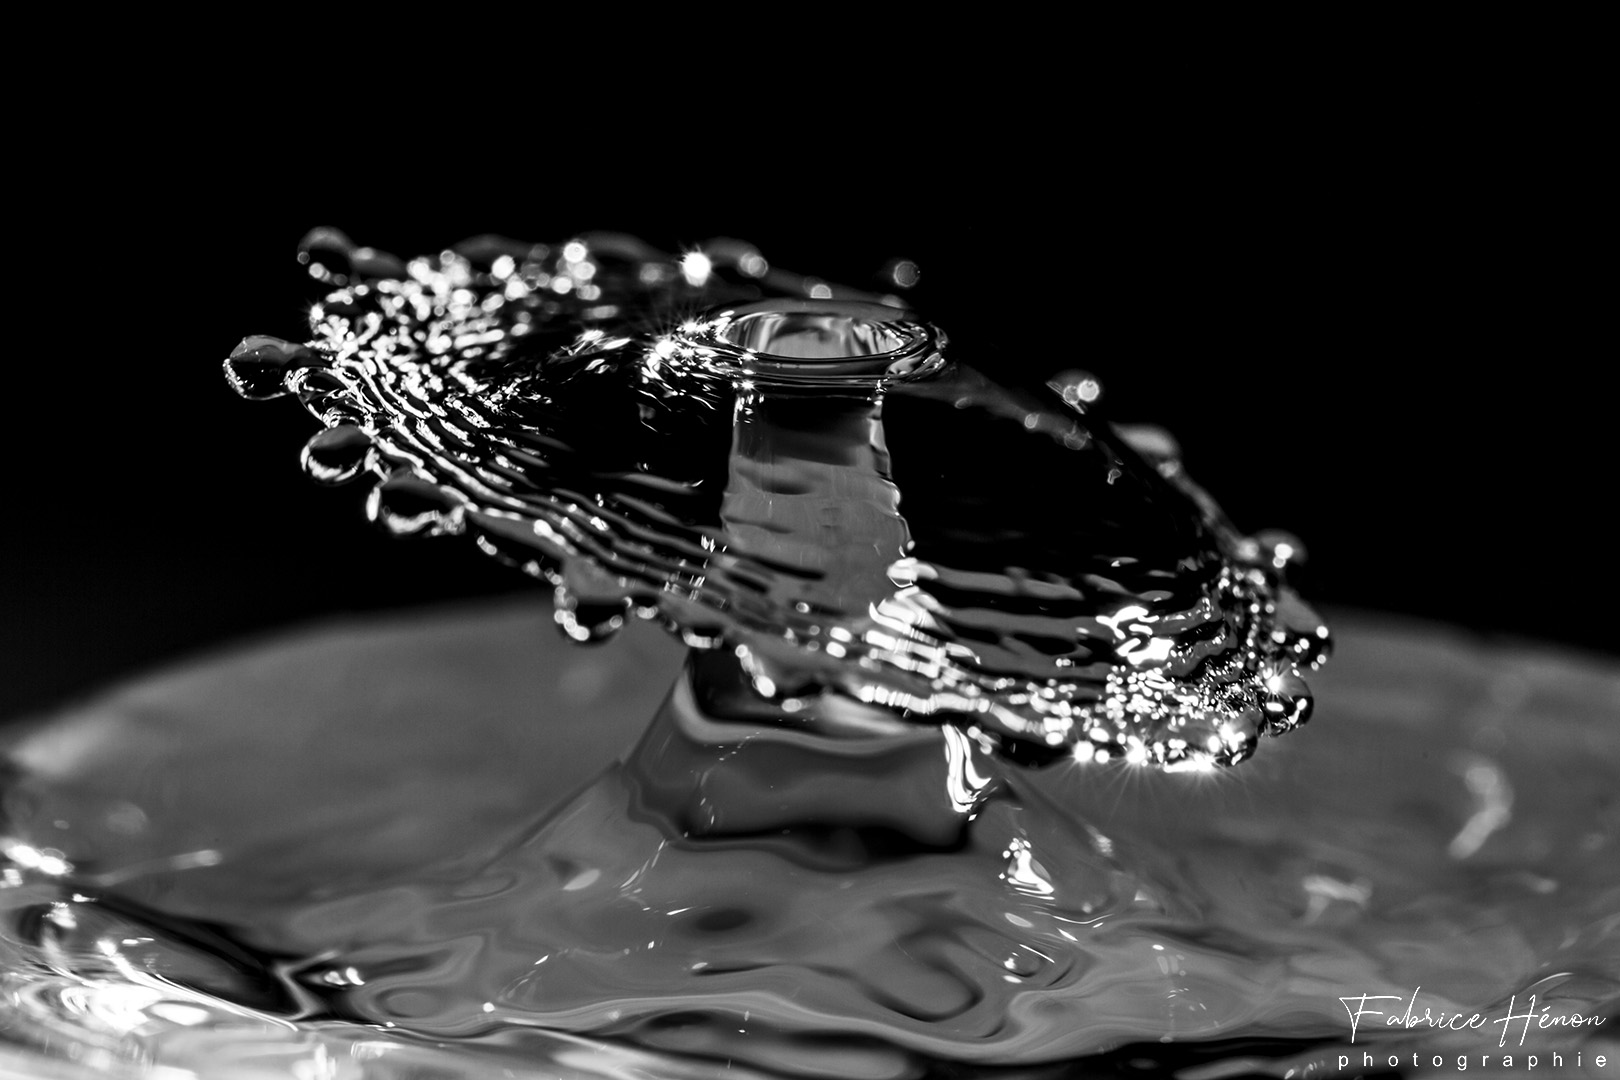 Droplet collision